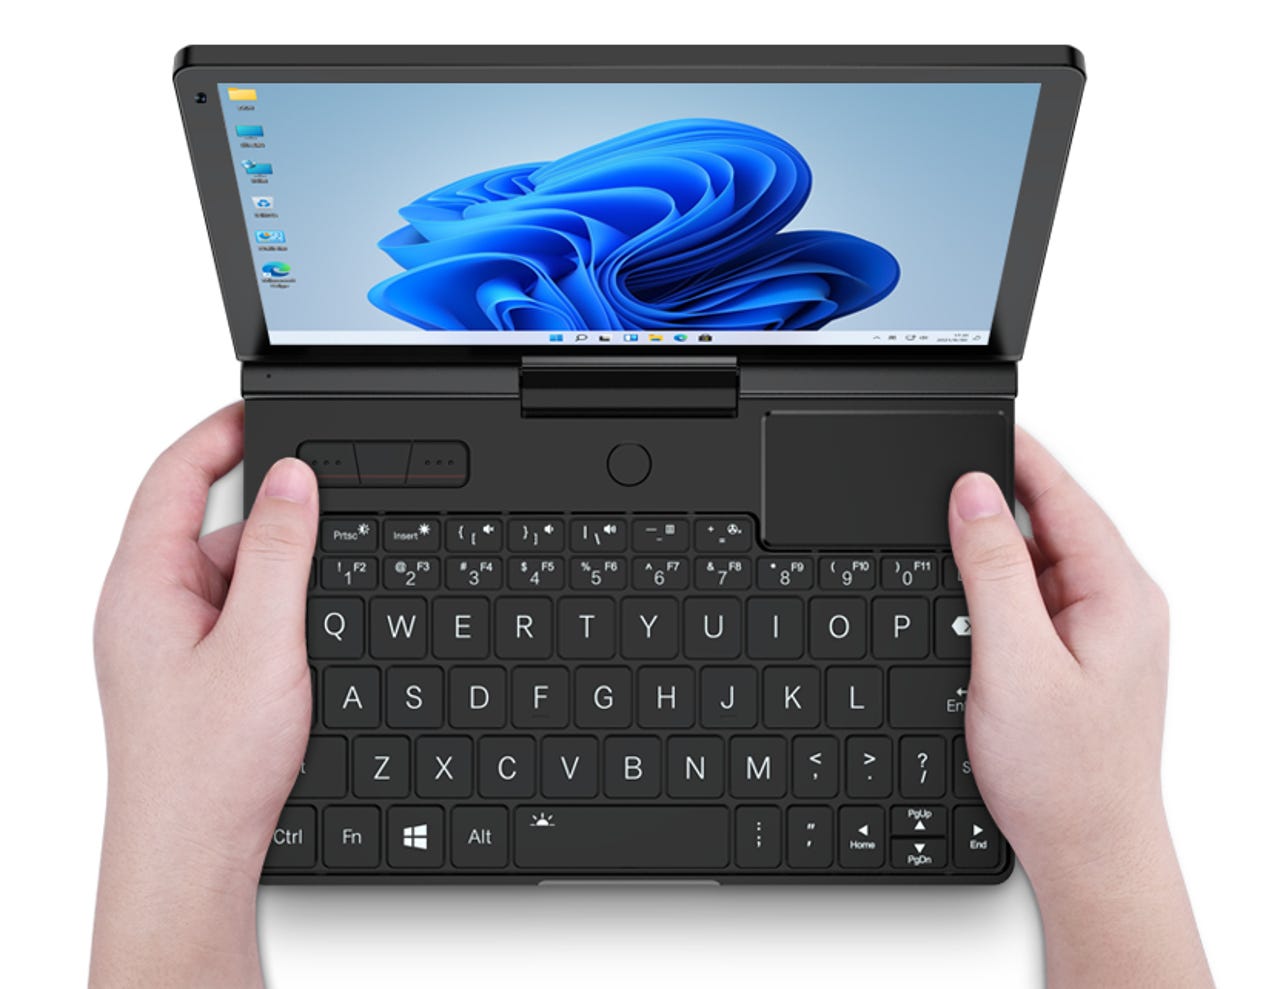 GPD Pocket 3 is a 8-inch mini-laptop with 2-in-1 design, modular